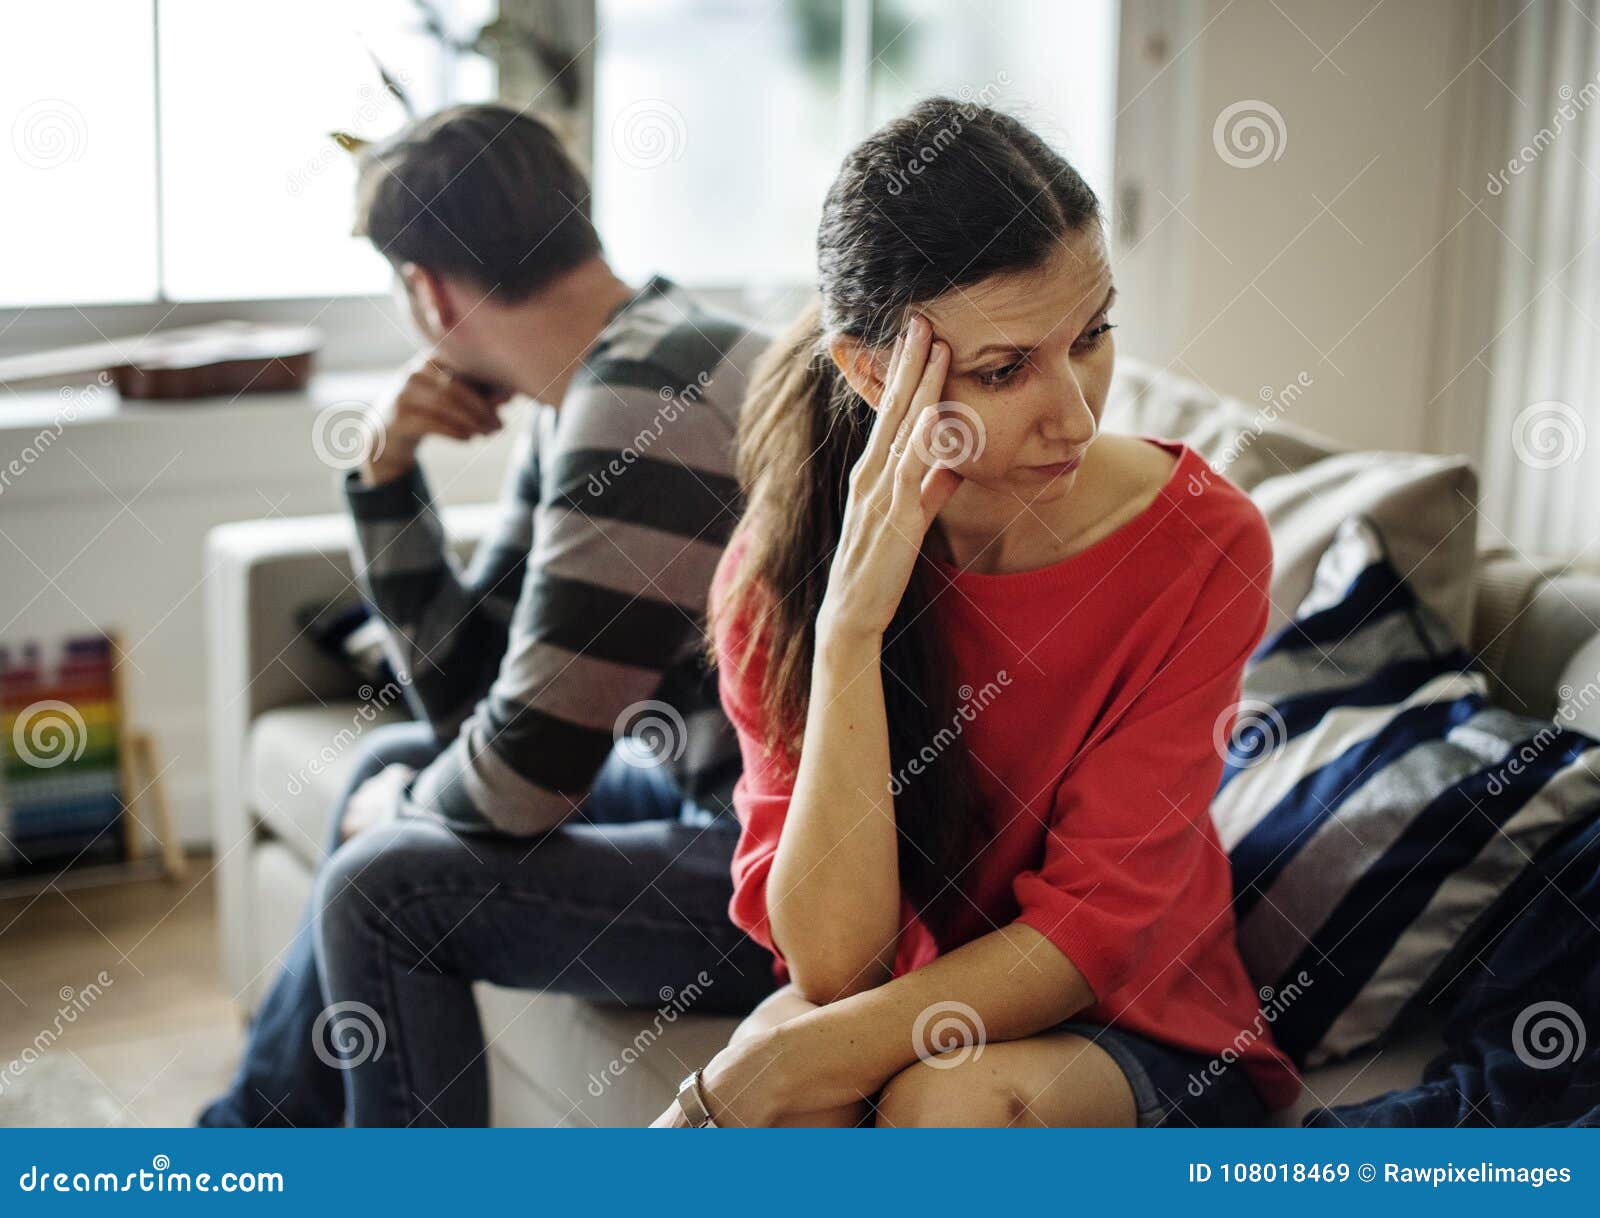 couple fighting with depressed face expression